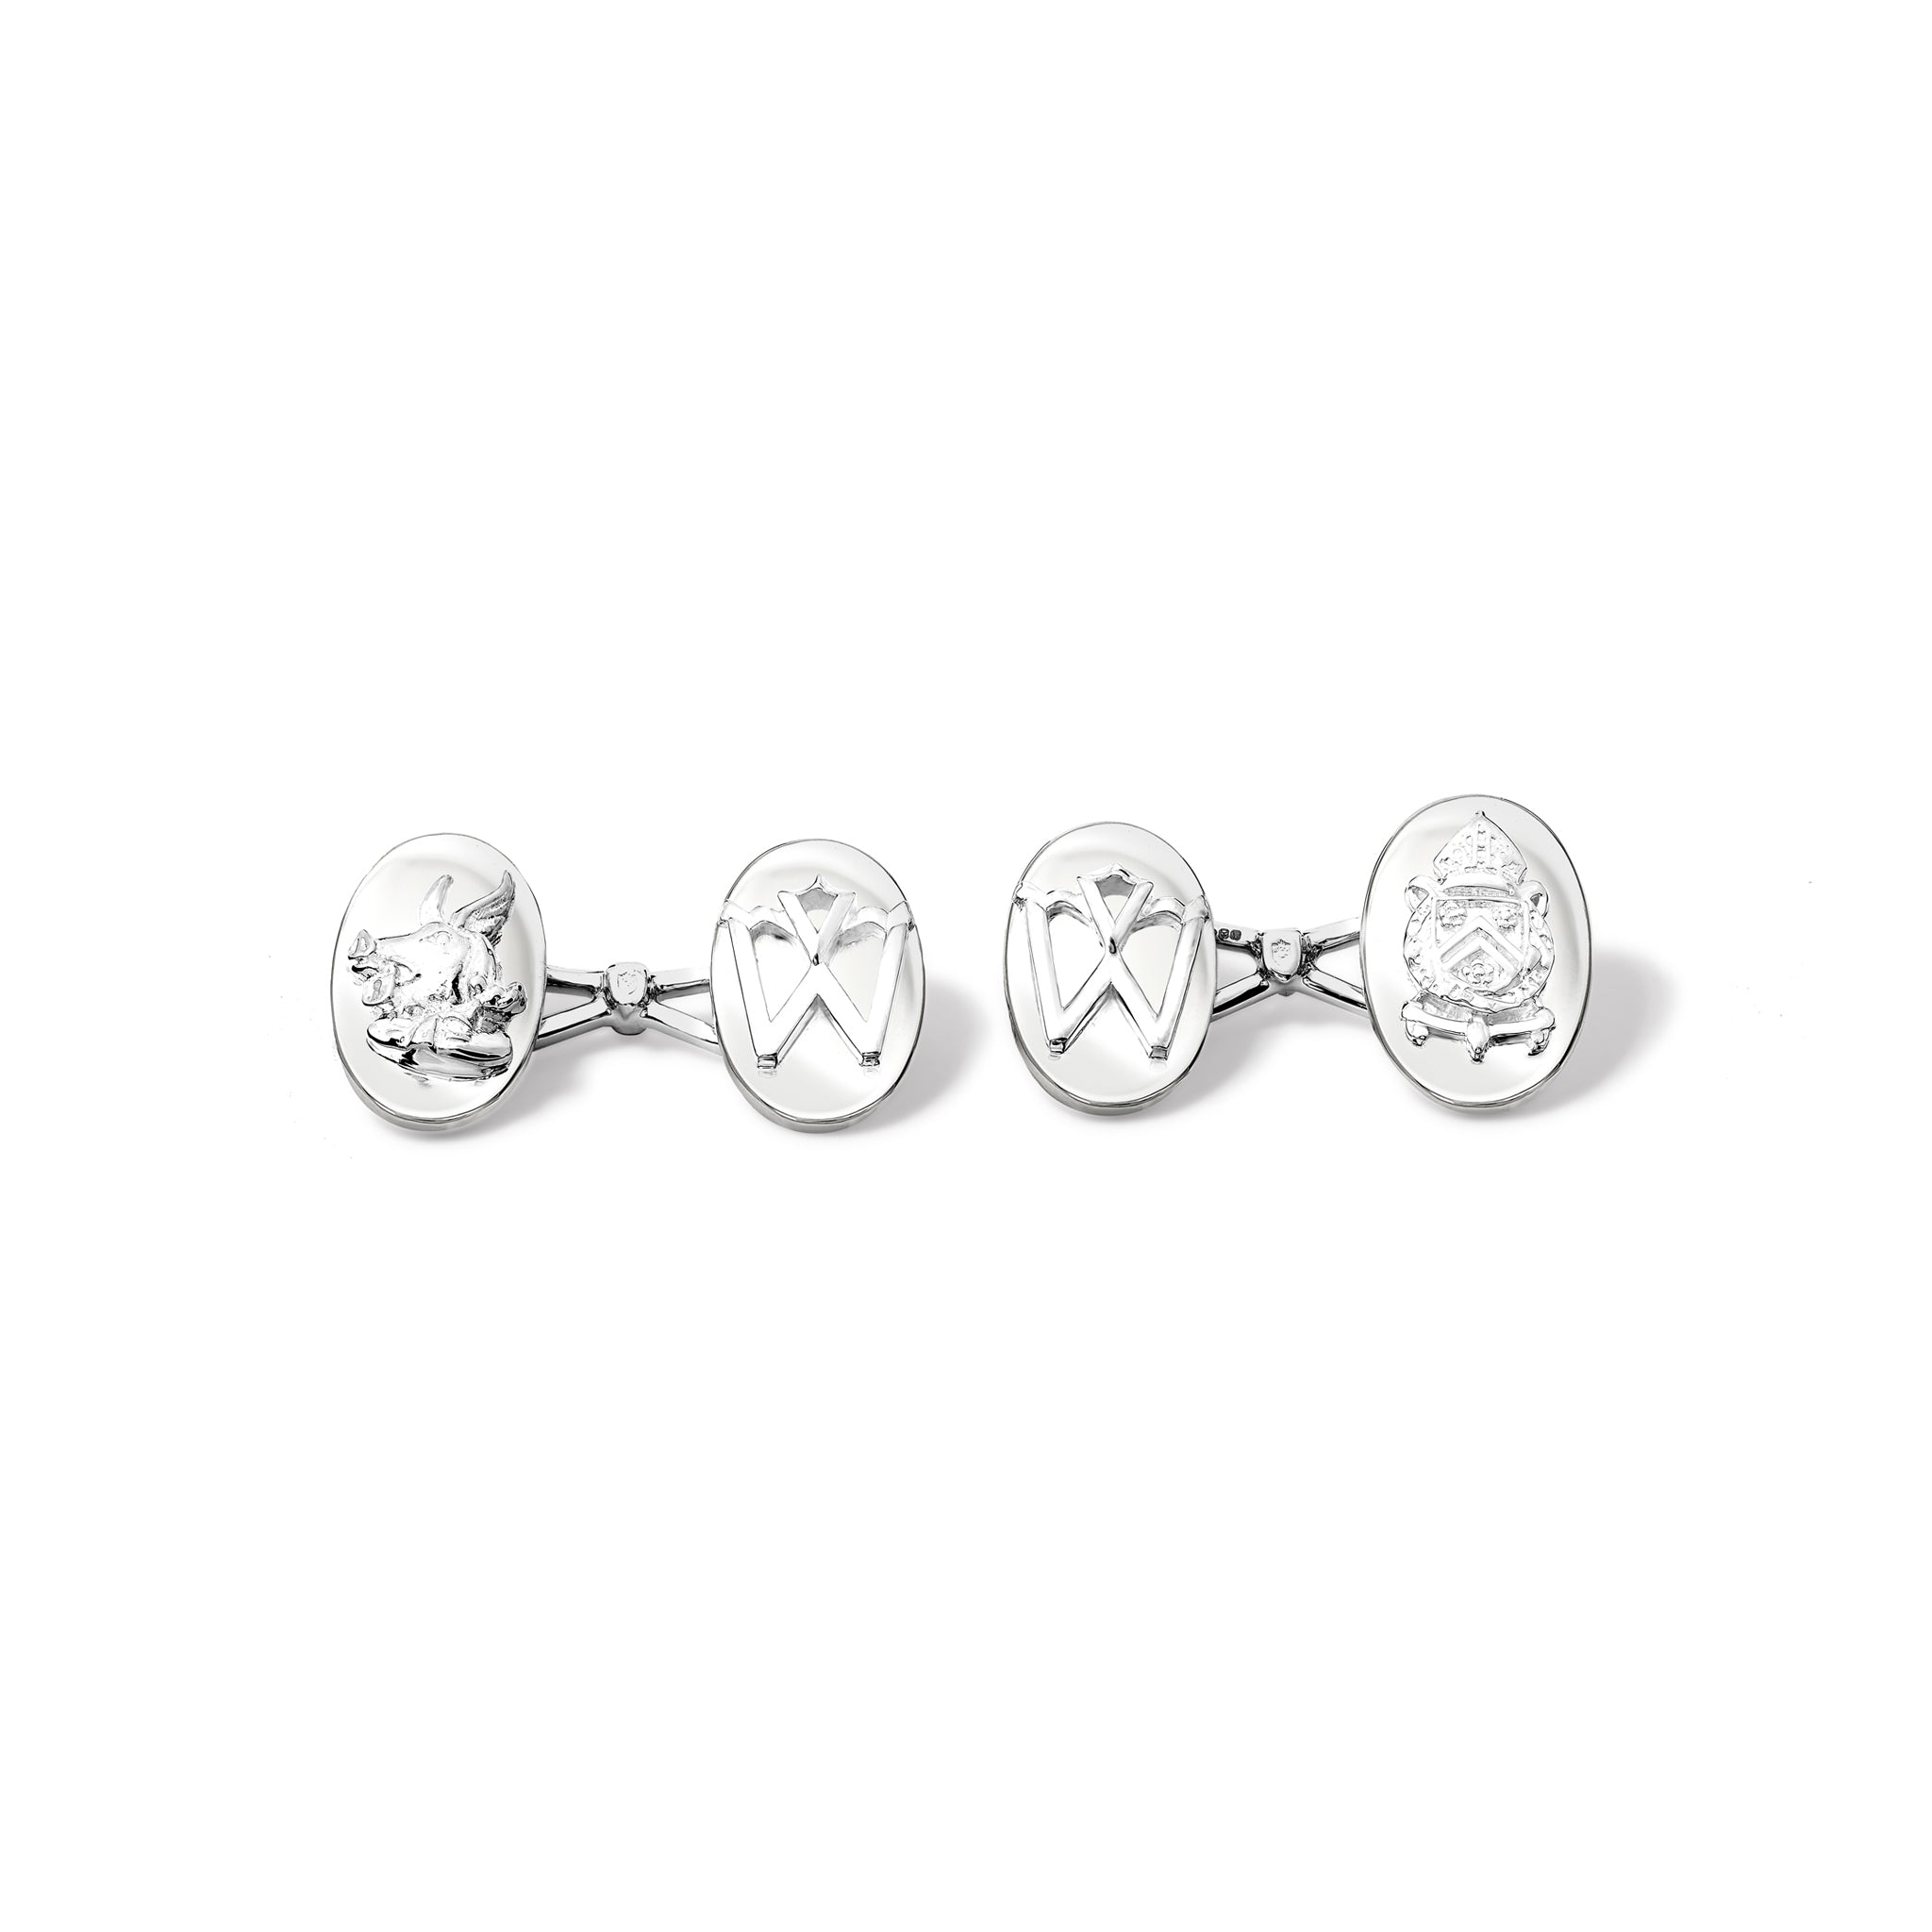 Winchester College Trusty Servant Double Ended Cufflinks Silver